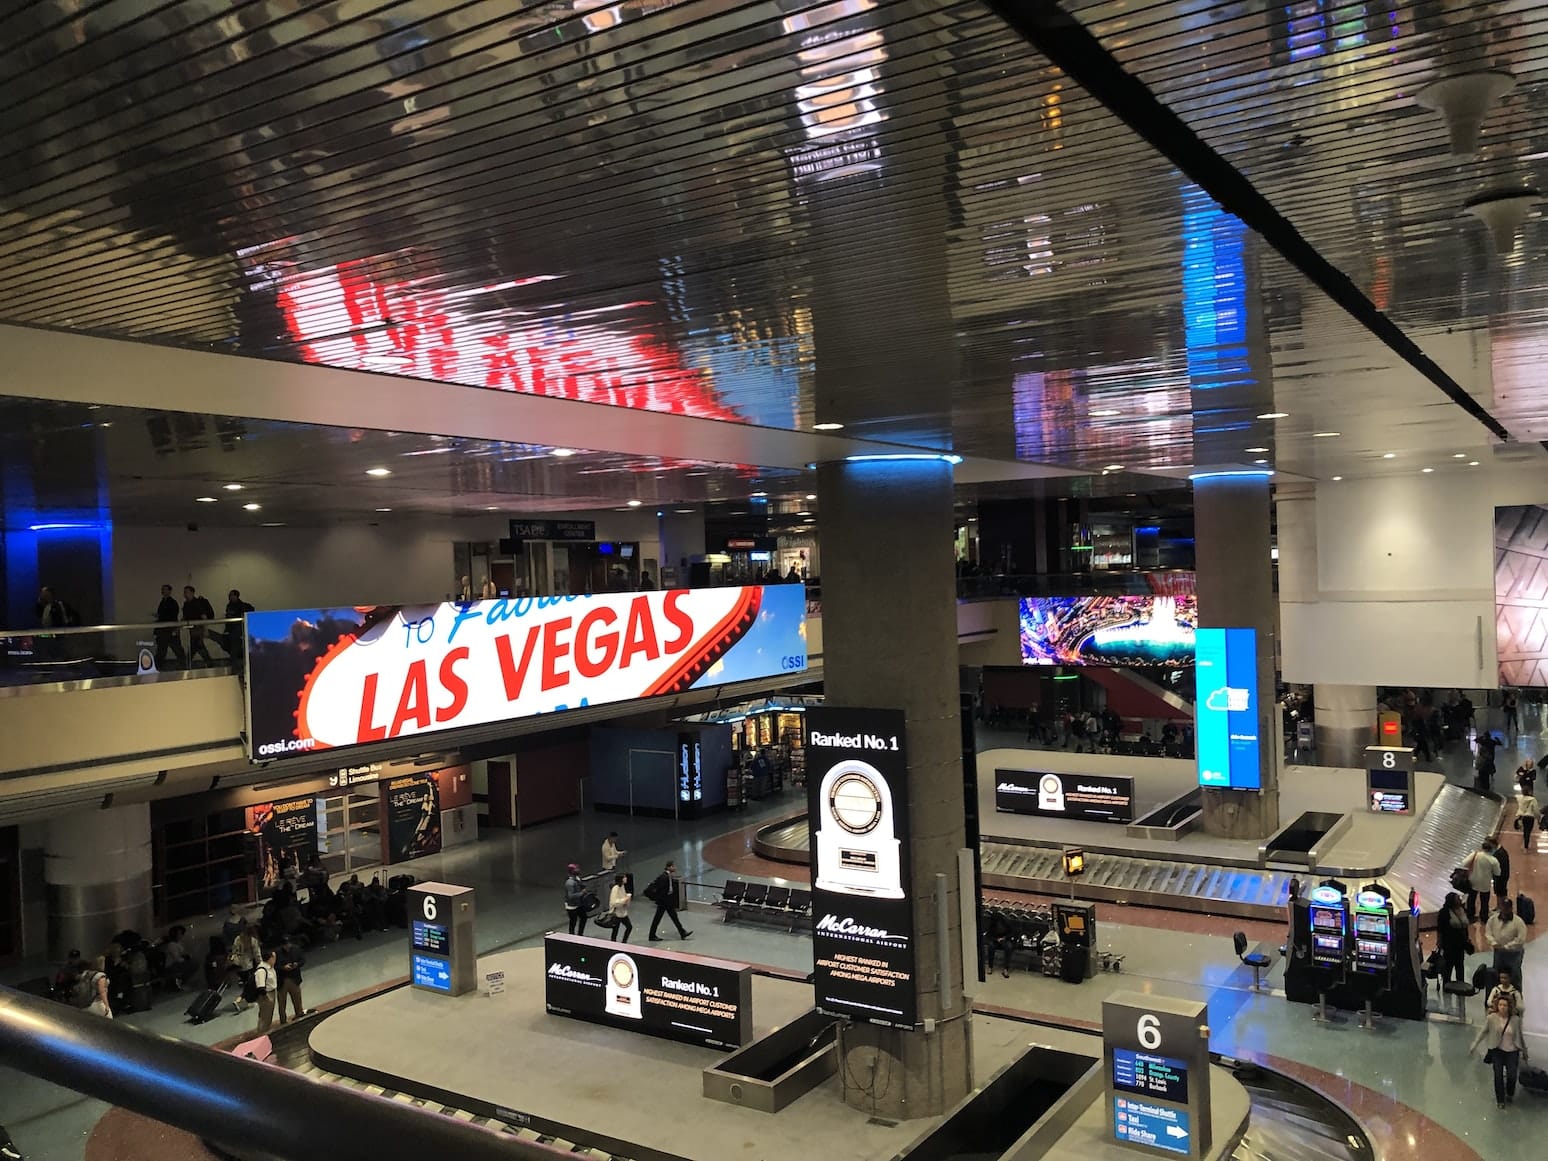 Guide to Getting from Harry Reid International Airport to the Las Vegas Strip